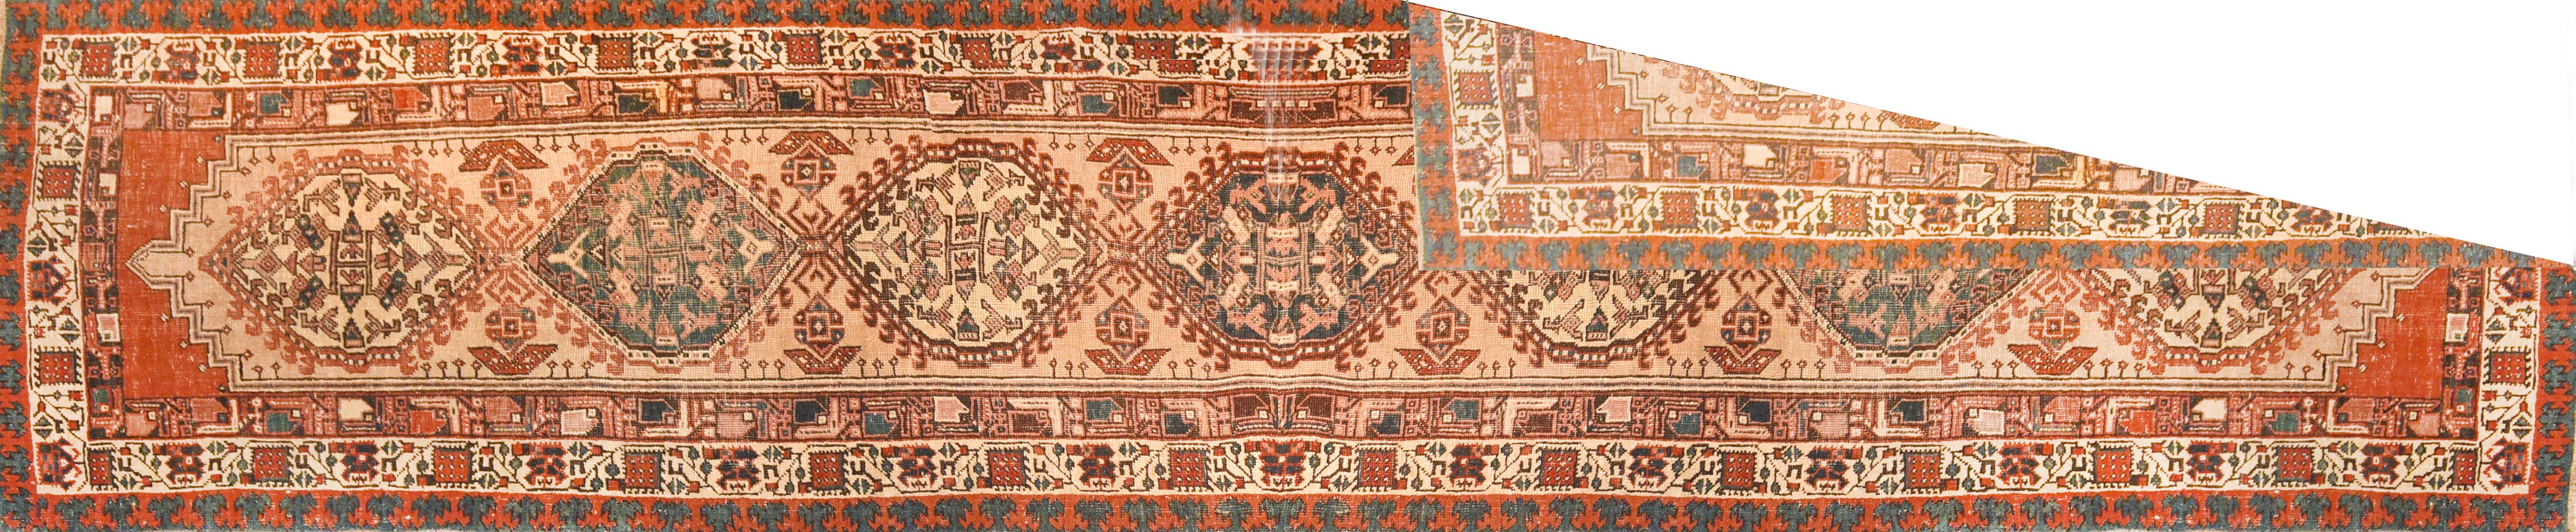 Serab rugs are known for their fine long rugs or runners with a characteristic camel ground and lozenge-shaped medallions. These rugs are woven in the village of Serab, located near Heriz in Persia. They are now used as a trade name for certain